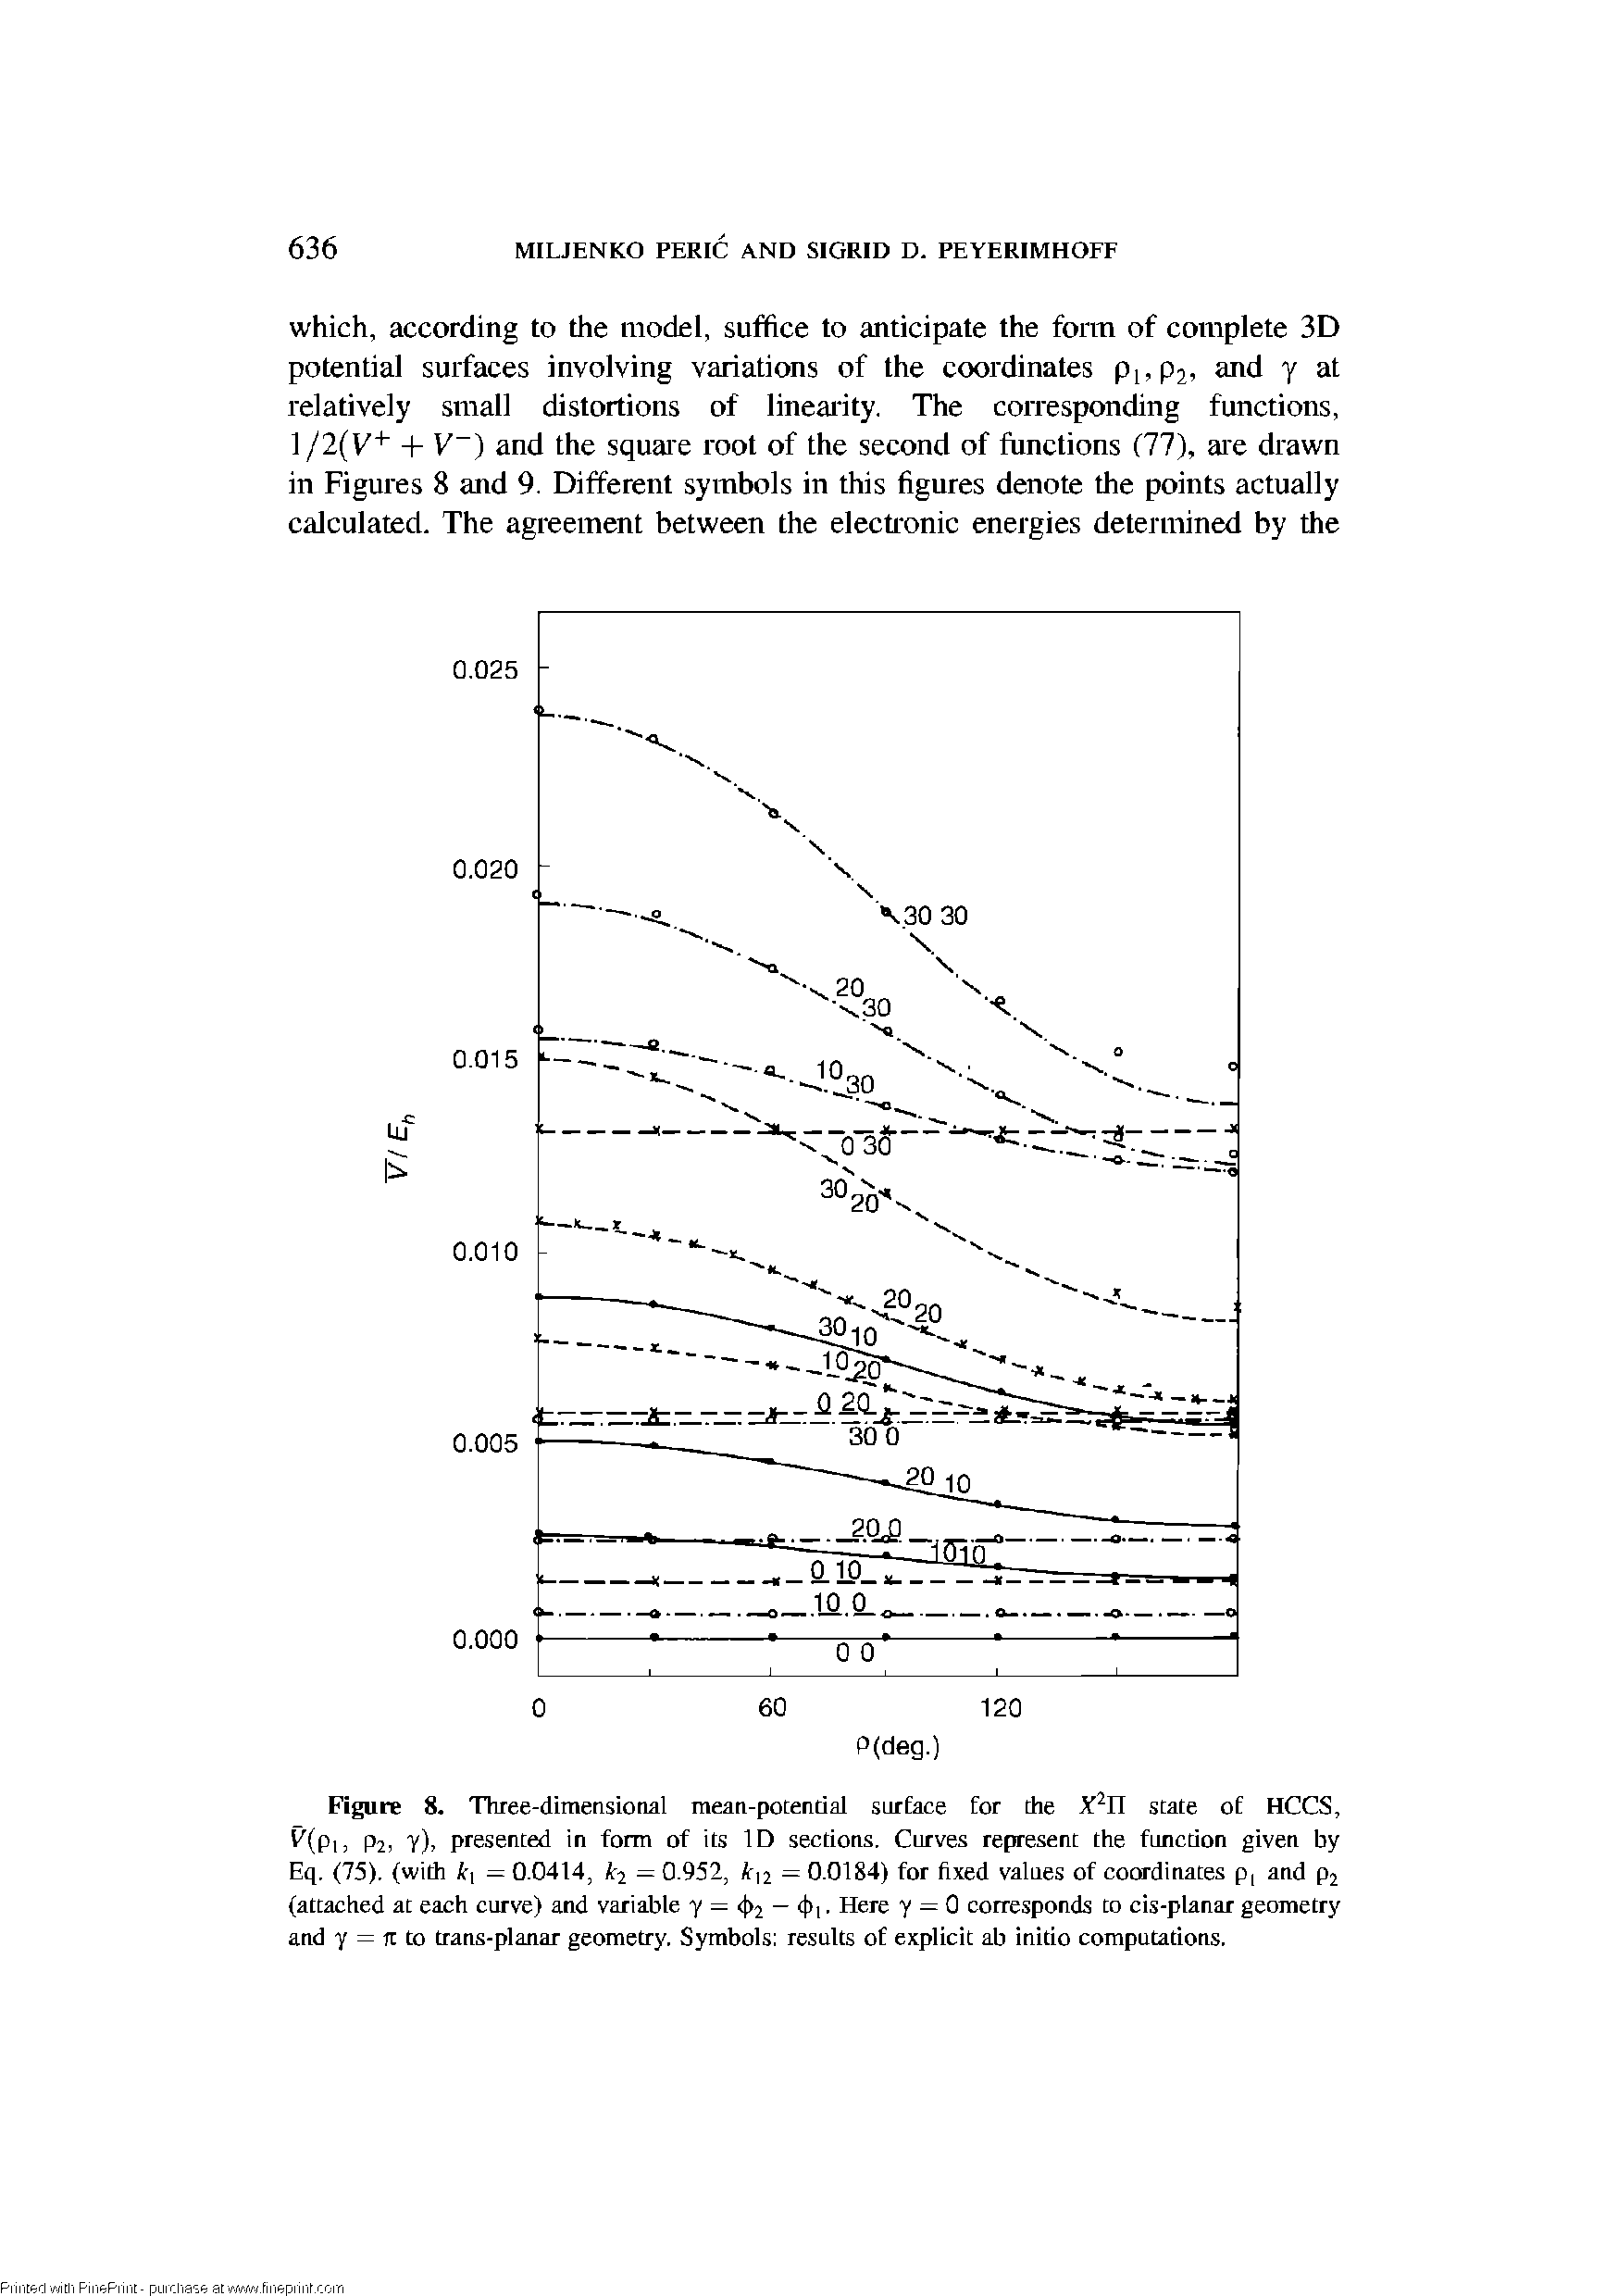 Figure 8. Three-dimensional mean-potential surface for the X IT state of HCCS, (Pi, Pa, y), presented in form of its ID sections. Curves represent the function given by Eq. (75). (with Ati — 0.0414, k2 — 0.952, tt 2 — 0.0184) for fixed values of coordinates p, and P2 (attached at each curve) and variable y — 4 2 4t Here y — 0 corresponds to cis-planar geometry and Y = ft to trans-planar geometry. Symbols results of explicit ab initio computations.